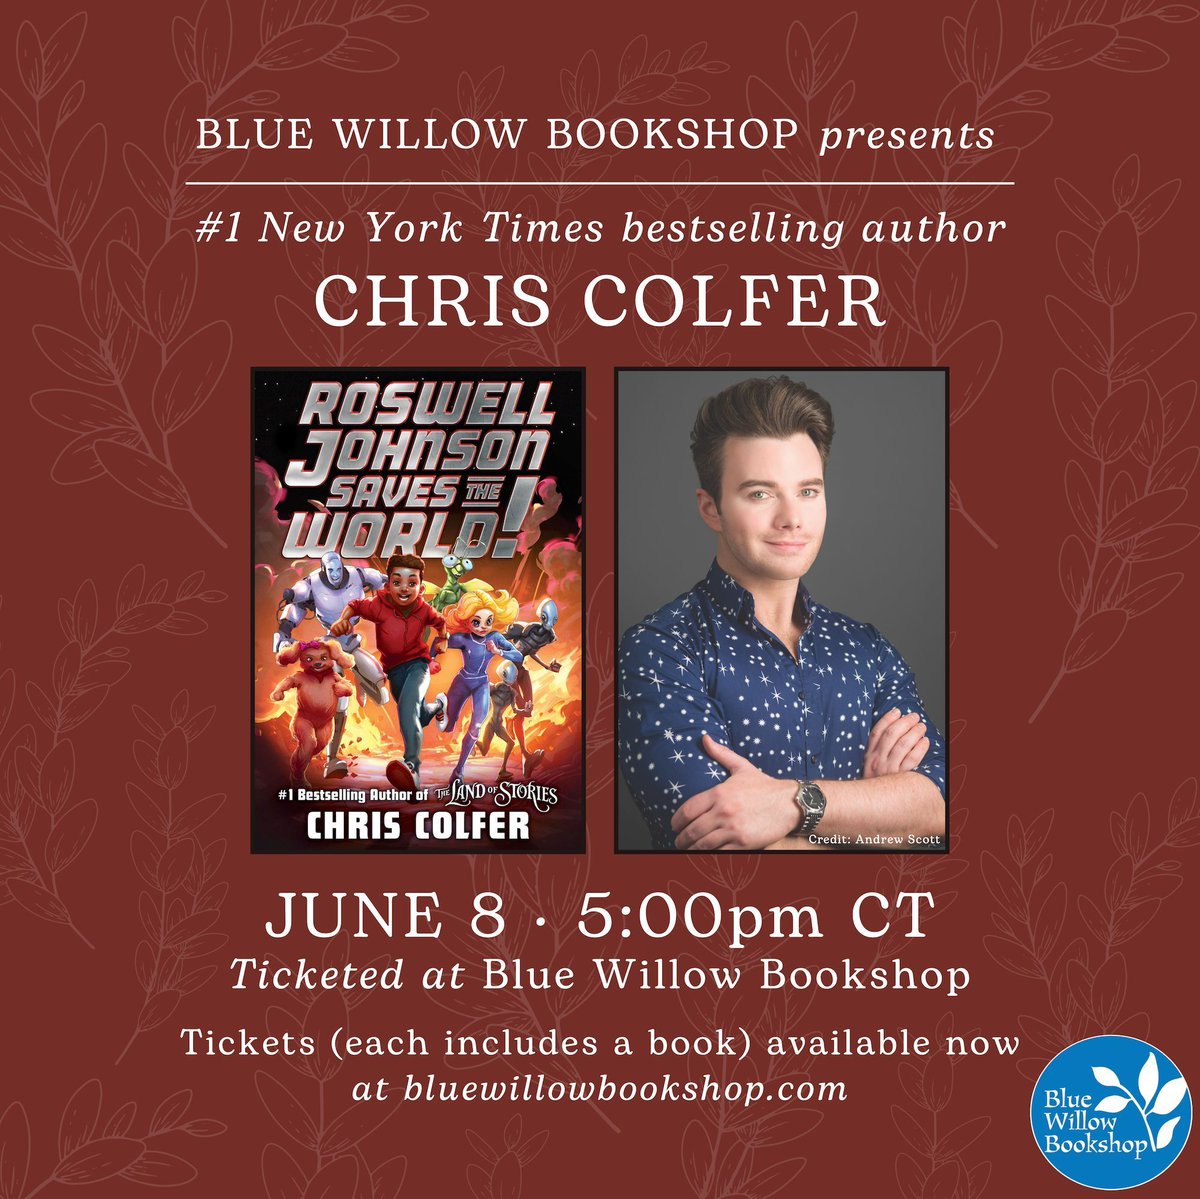 📣 Meet @chriscolfer in #Houston! Get your ticket to meet #1 NYT bestselling author and Golden Globe-winning actor Chris Colfer and have your copy of his new book, ROSWELL JOHNSON SAVES THE WORLD, signed! 😍 Tickets and details: bluewillowbookshop.com/event/colfer-2… @LittleBrownYR